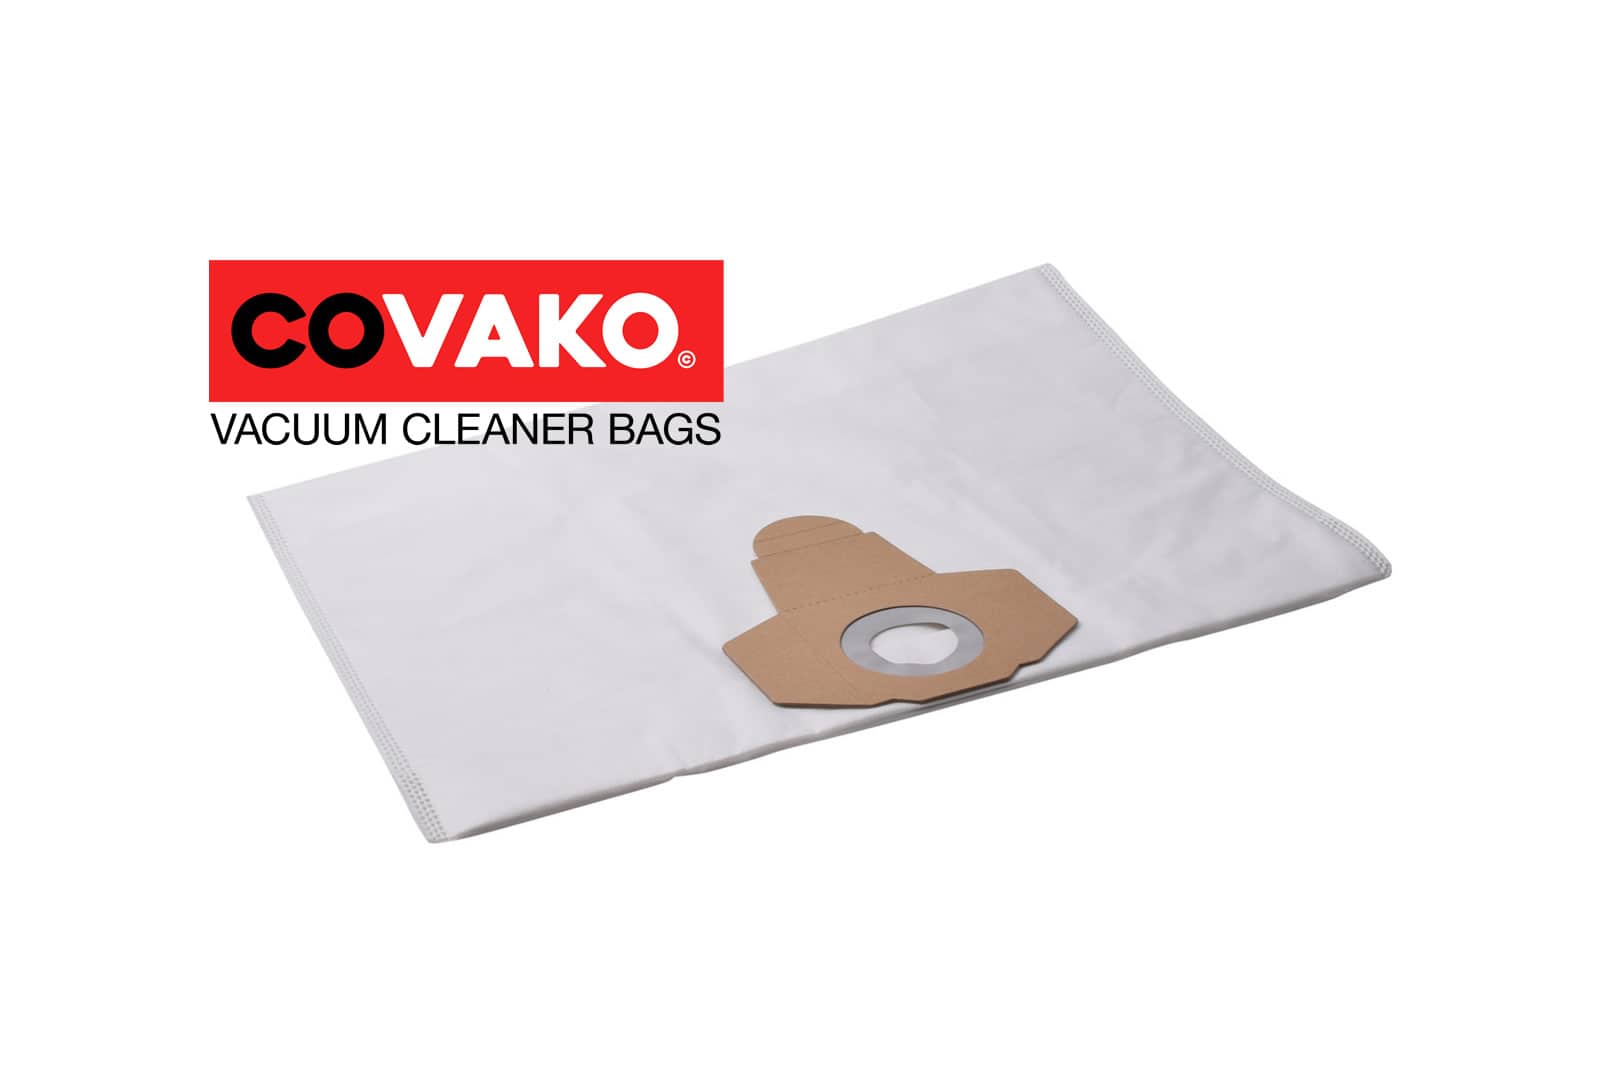 Einhell TH-VC 1820 S / Synthesis - Einhell vacuum cleaner bags